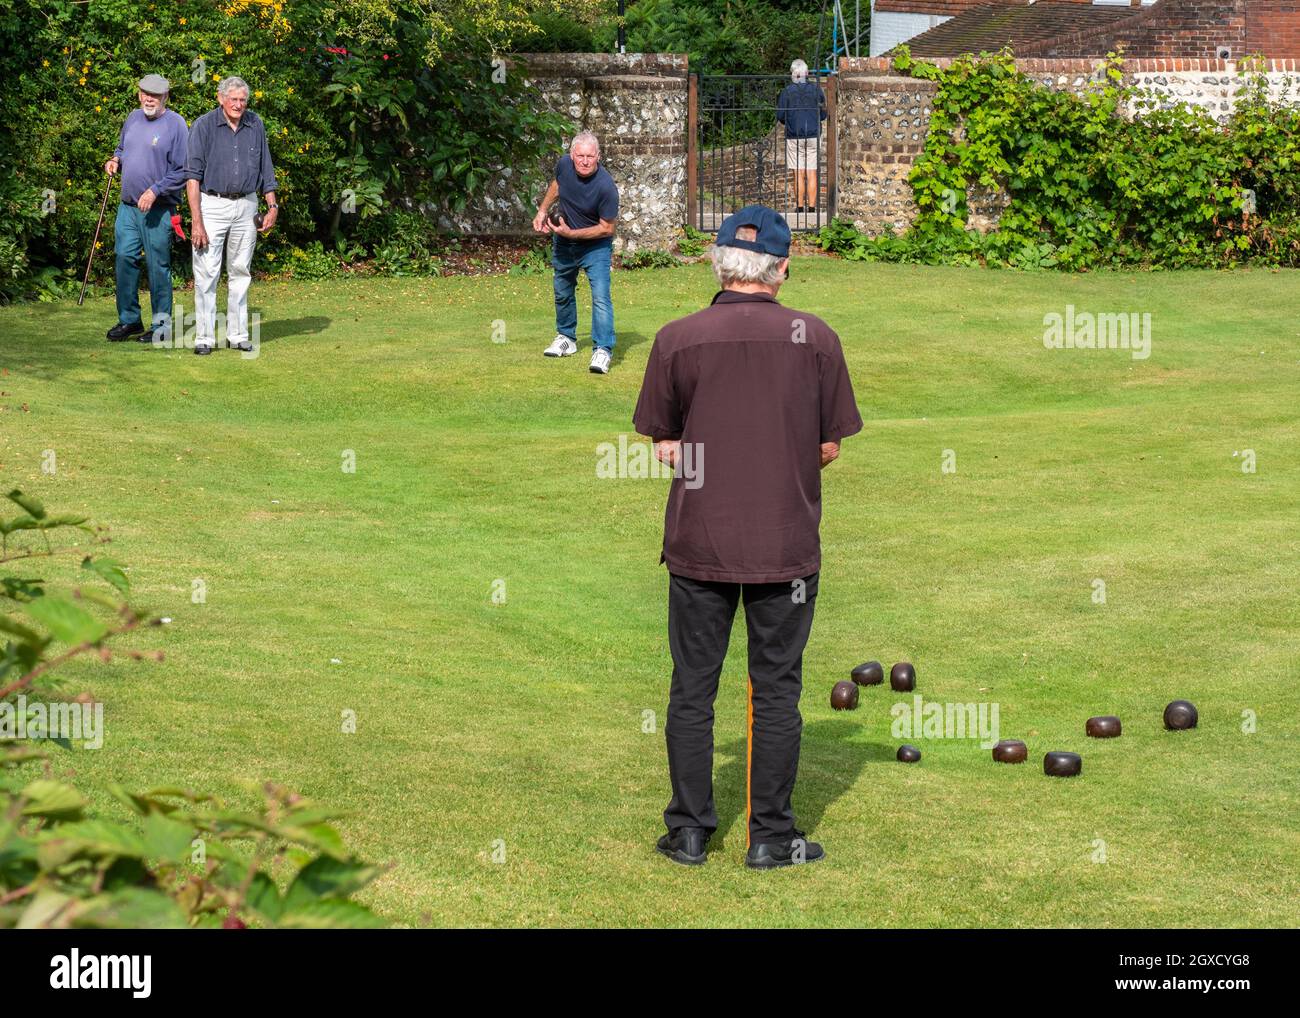 English Crown Green Bowls. A group of senior gentlemen enjoying a game of bowls on medieval lawns of Lewes, East Sussex, England. Stock Photo